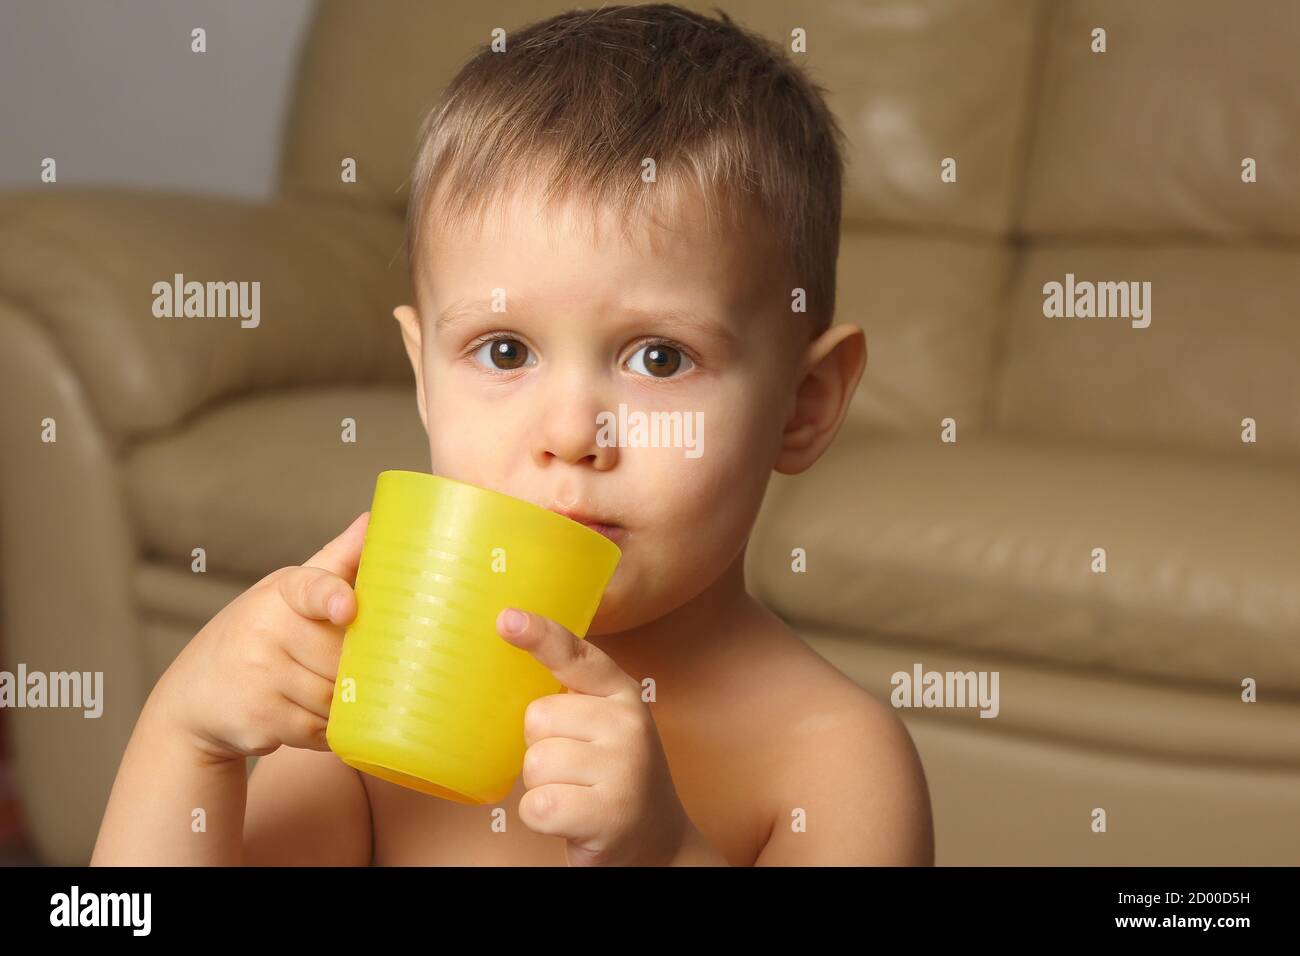 little boy drinking from a plastic Cup Stock Photo